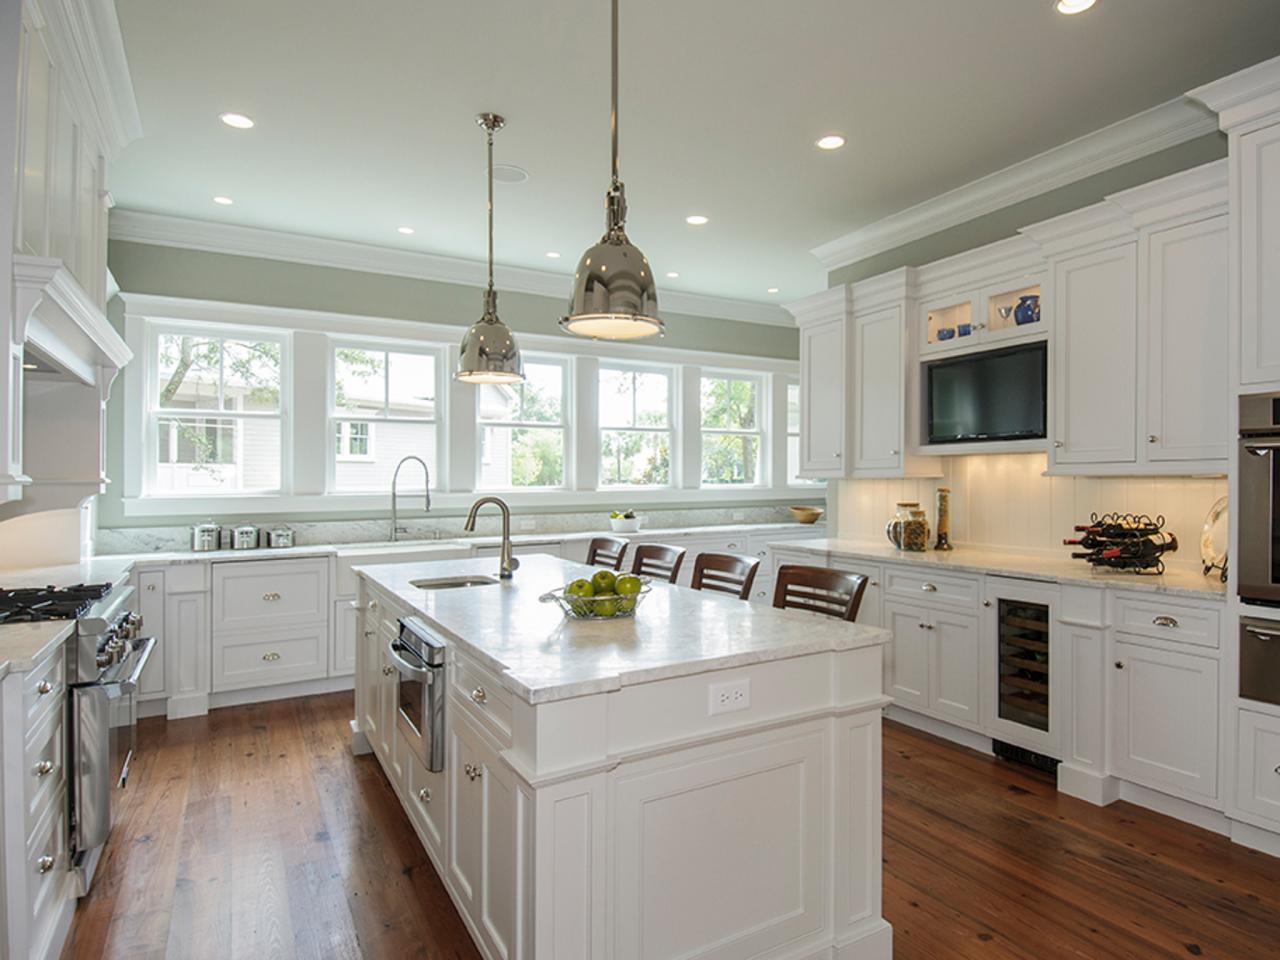 French Country Kitchen Design White Cabinets In Combination With